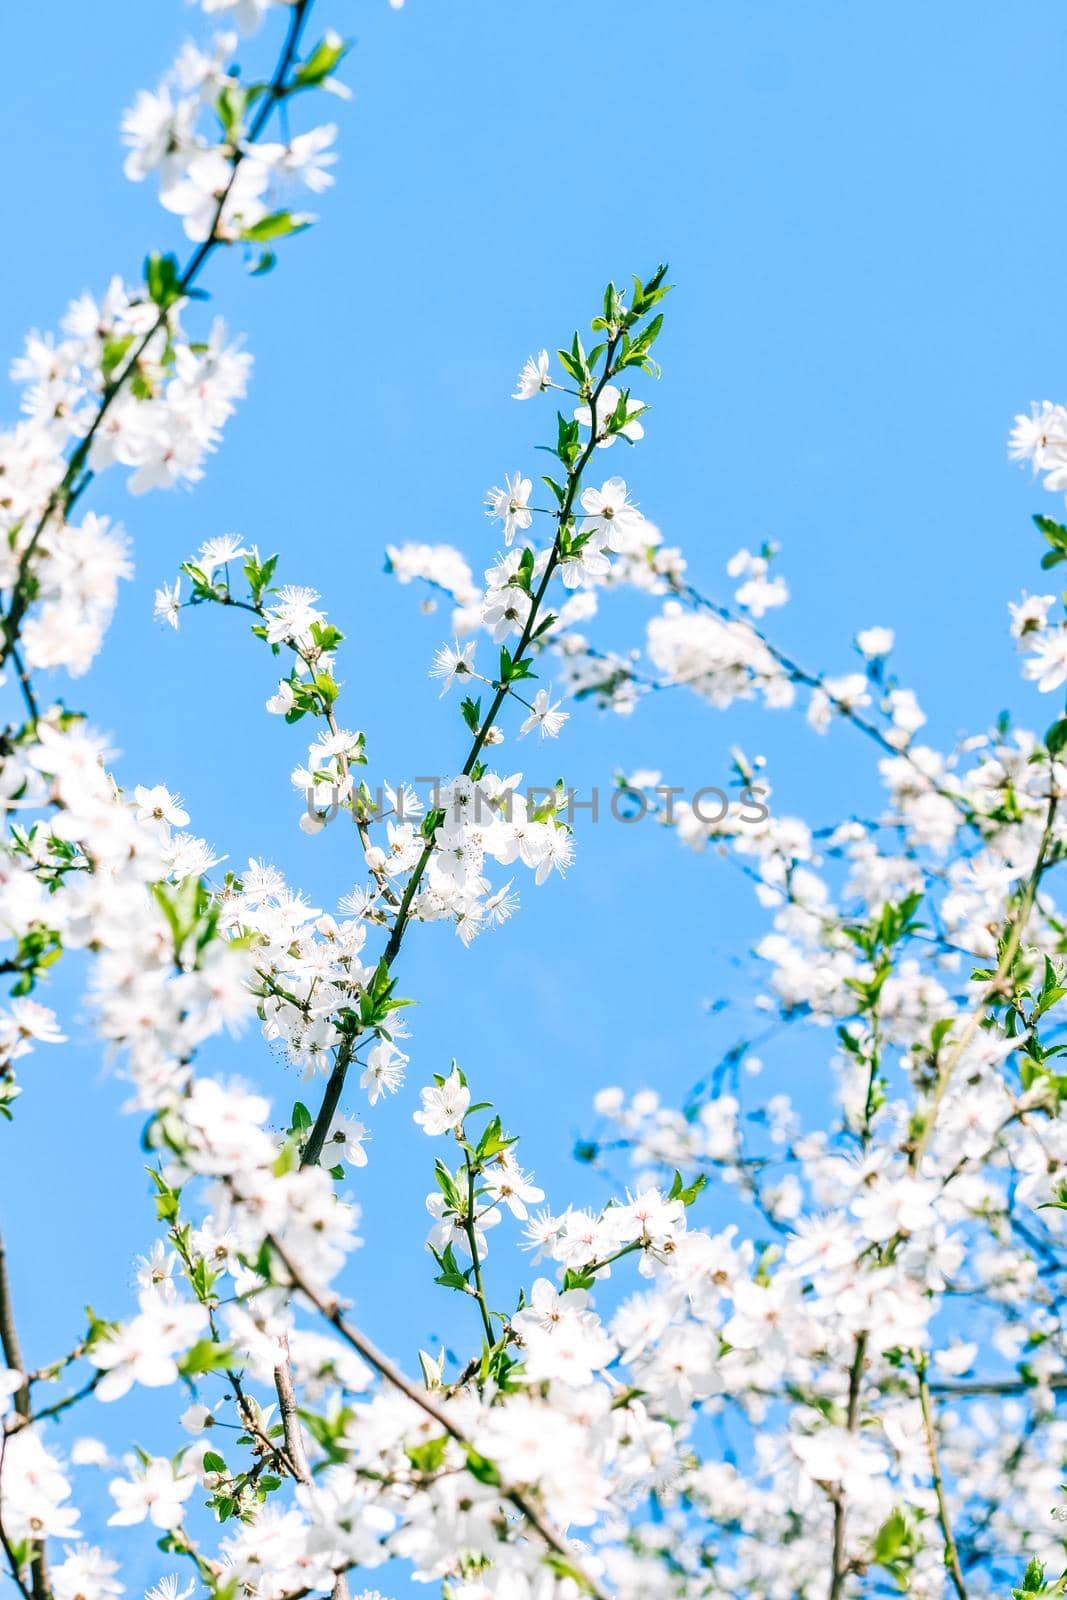 Cherry tree blossom and blue sky, white flowers as nature background by Anneleven